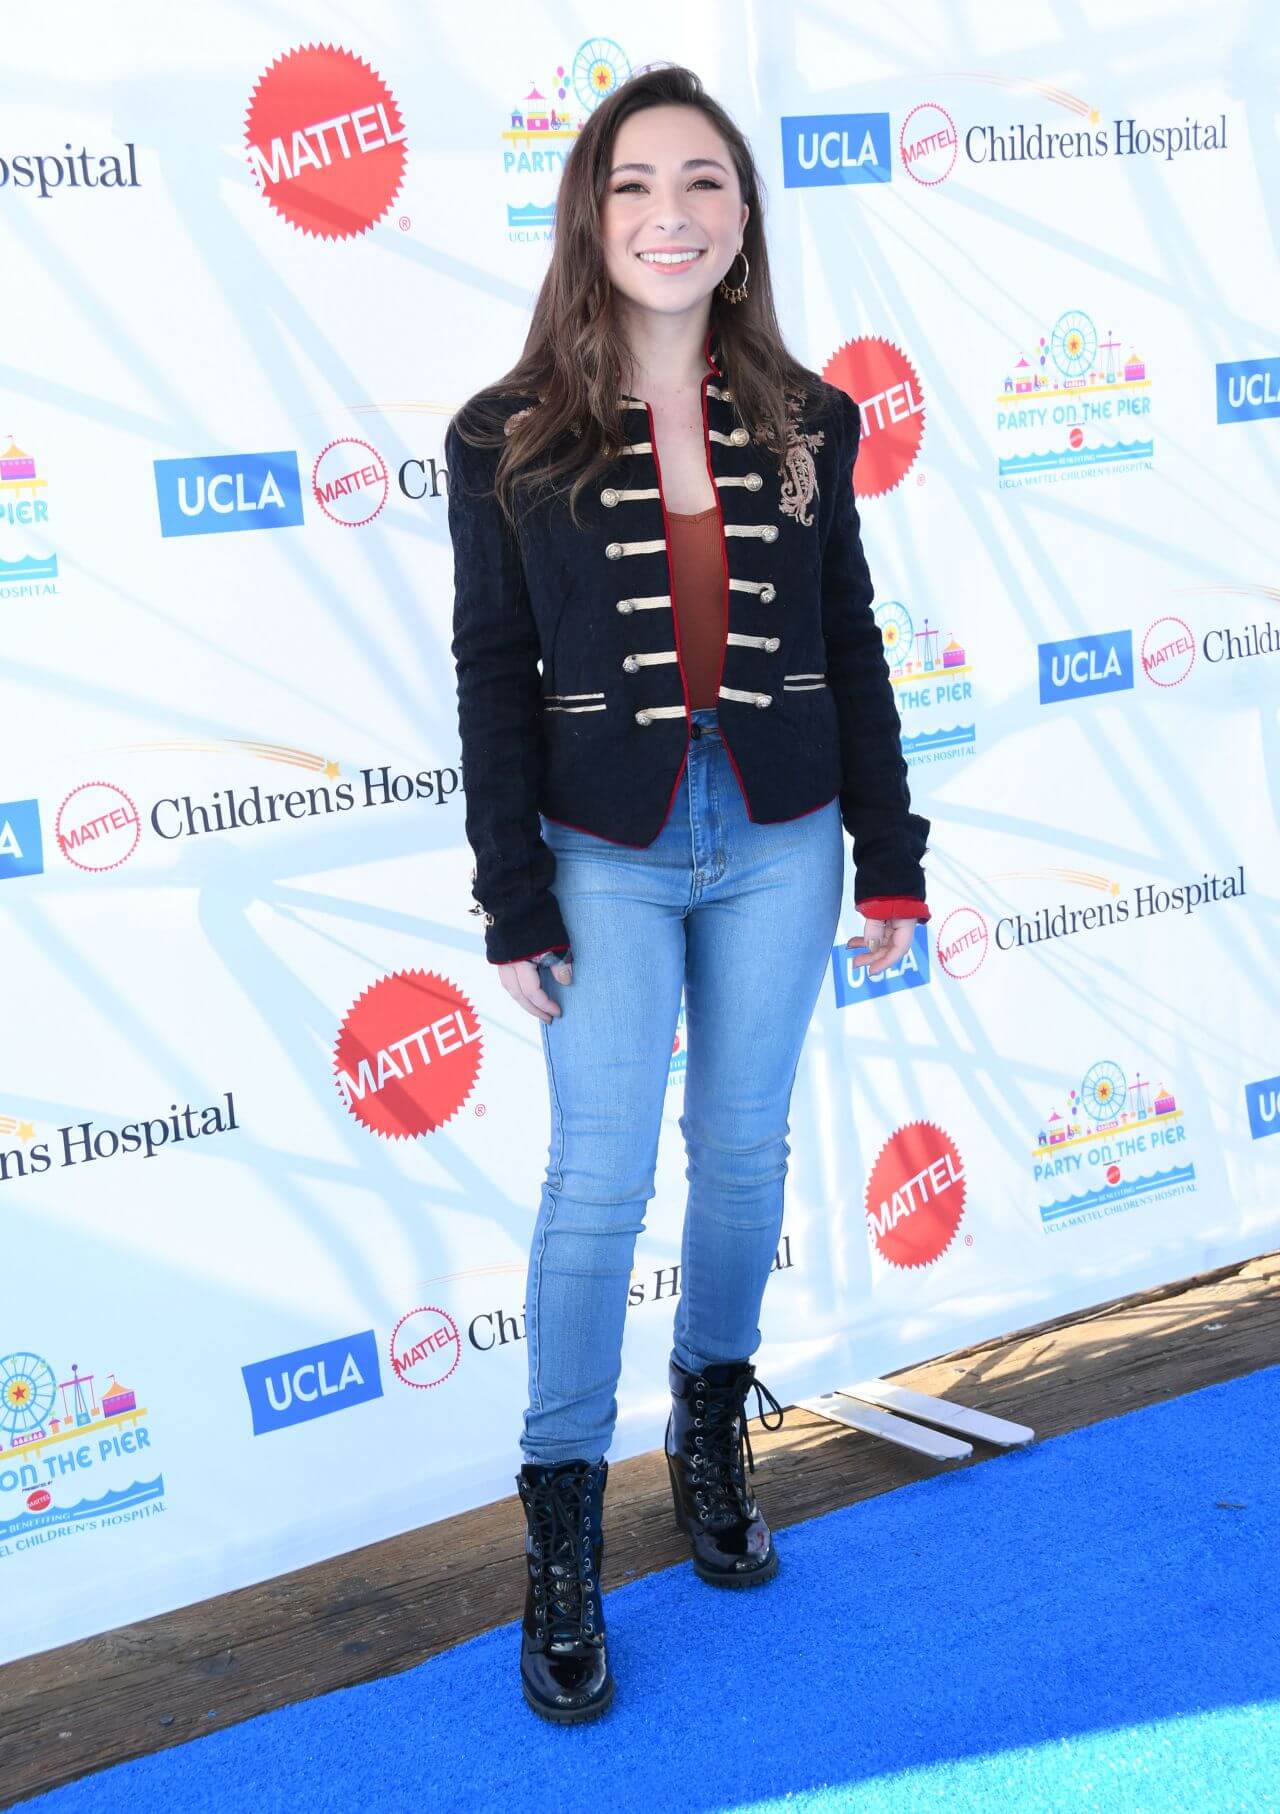 Ava Cantrell In Black Coat Under Top With Blue Denim Jeans At “Party on the Pier” in Santa Monica